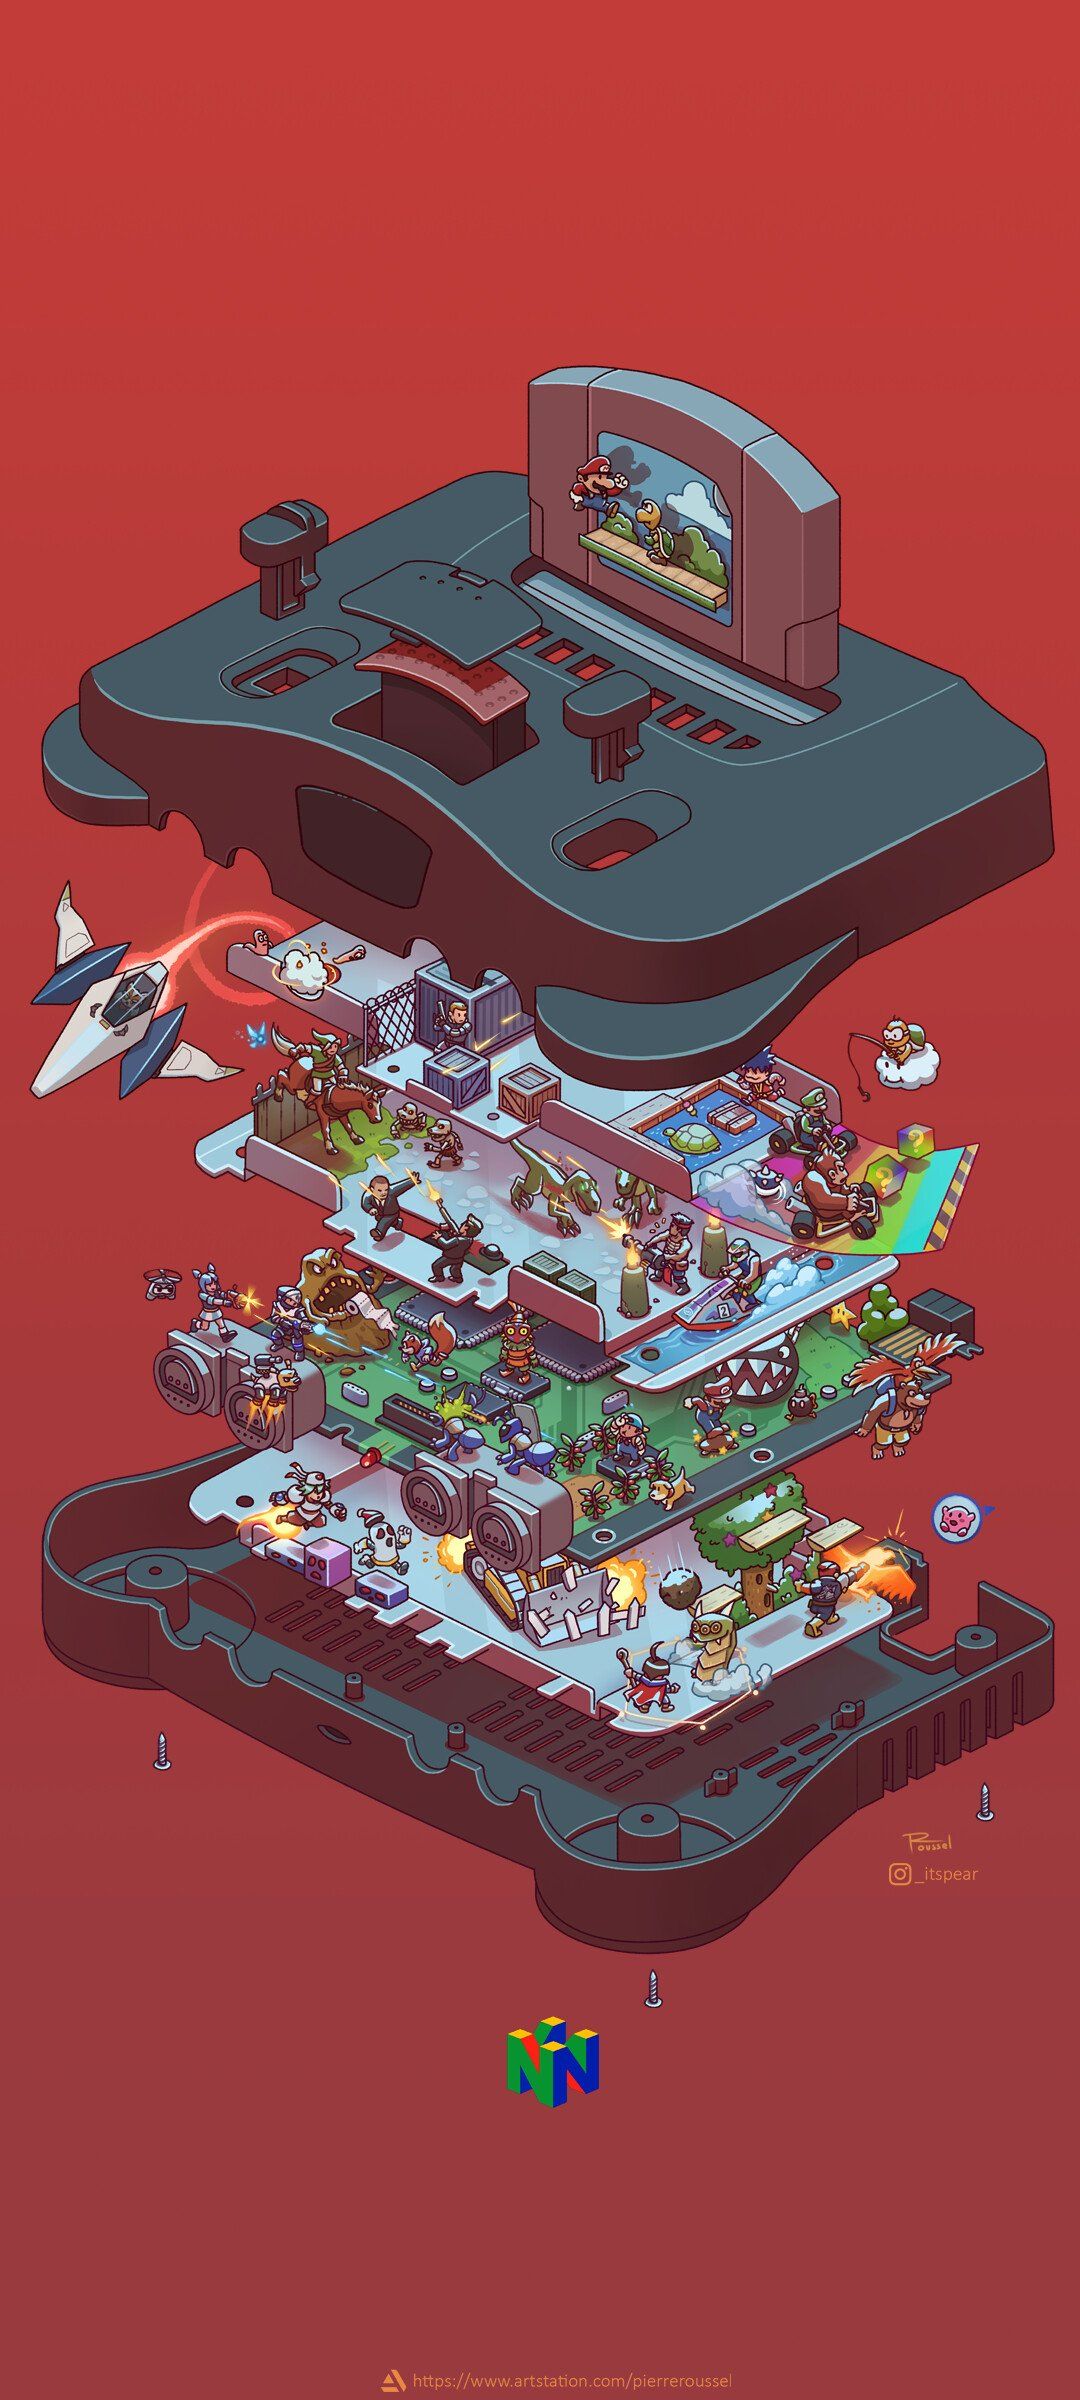 THE ART OF VIDEO GAMES on Twitter. Retro games wallpaper, Retro gaming art, Retro wallpaper